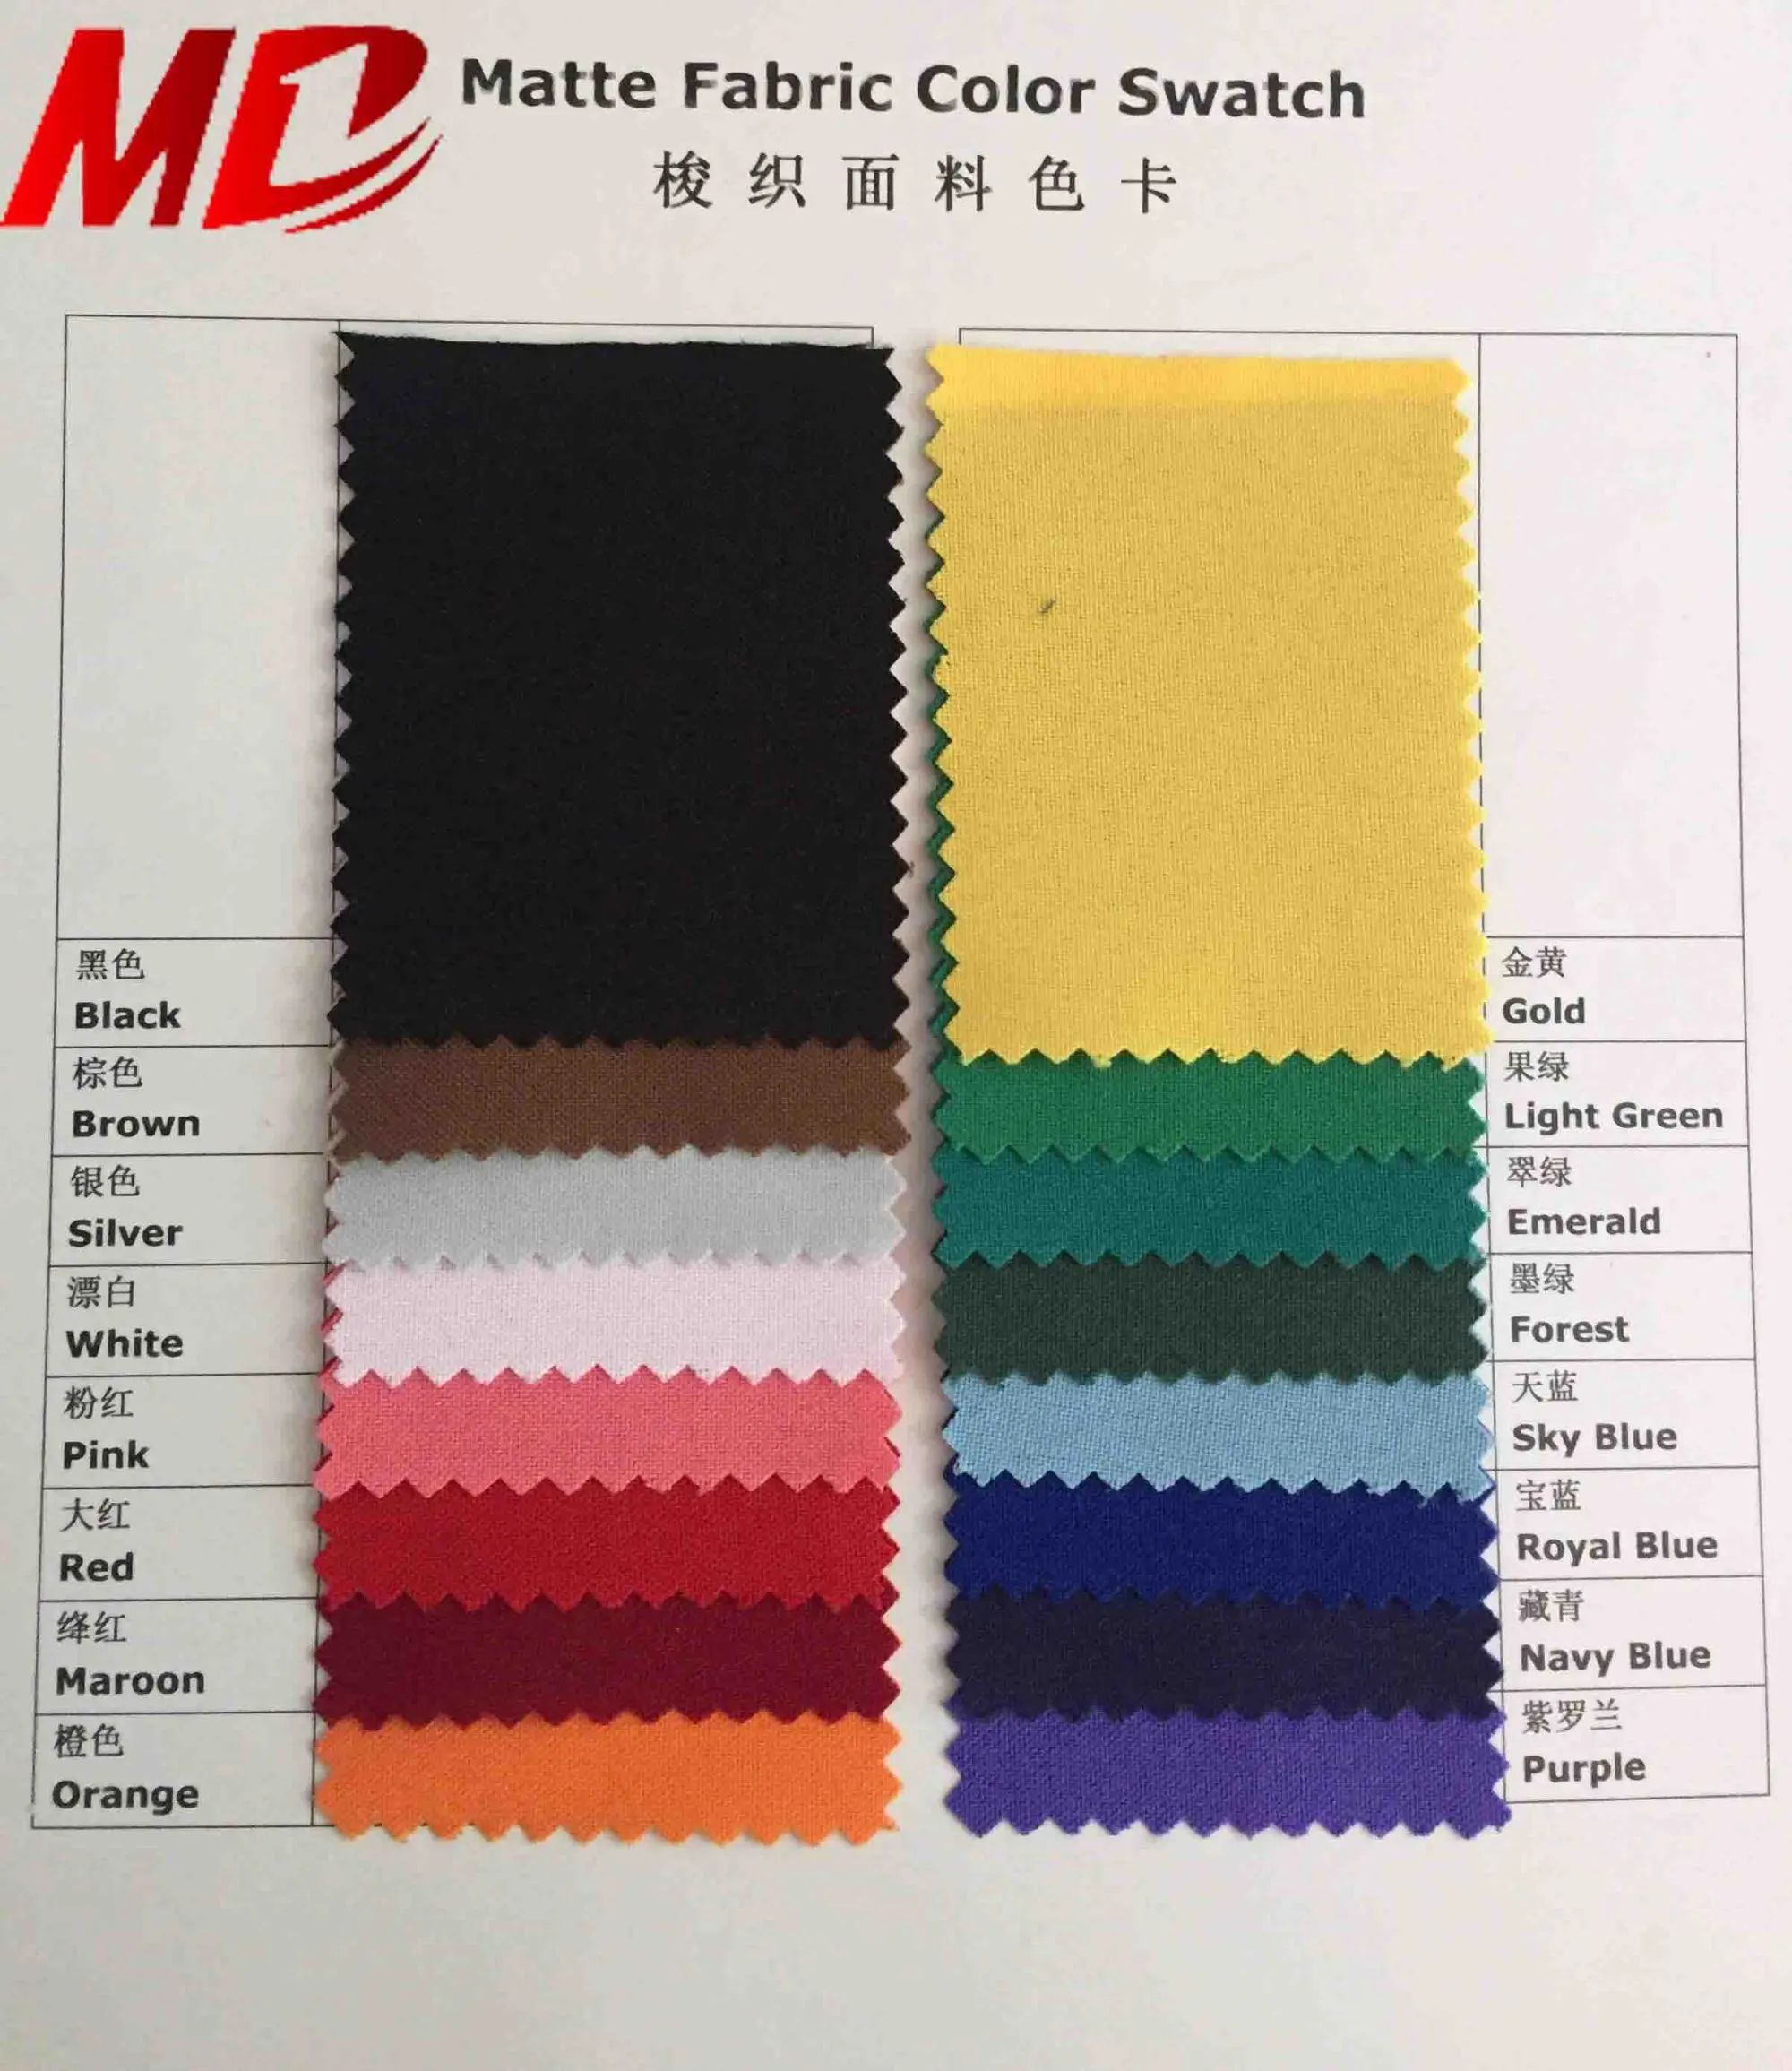 MATTE FABRIC COLOR SWATCH